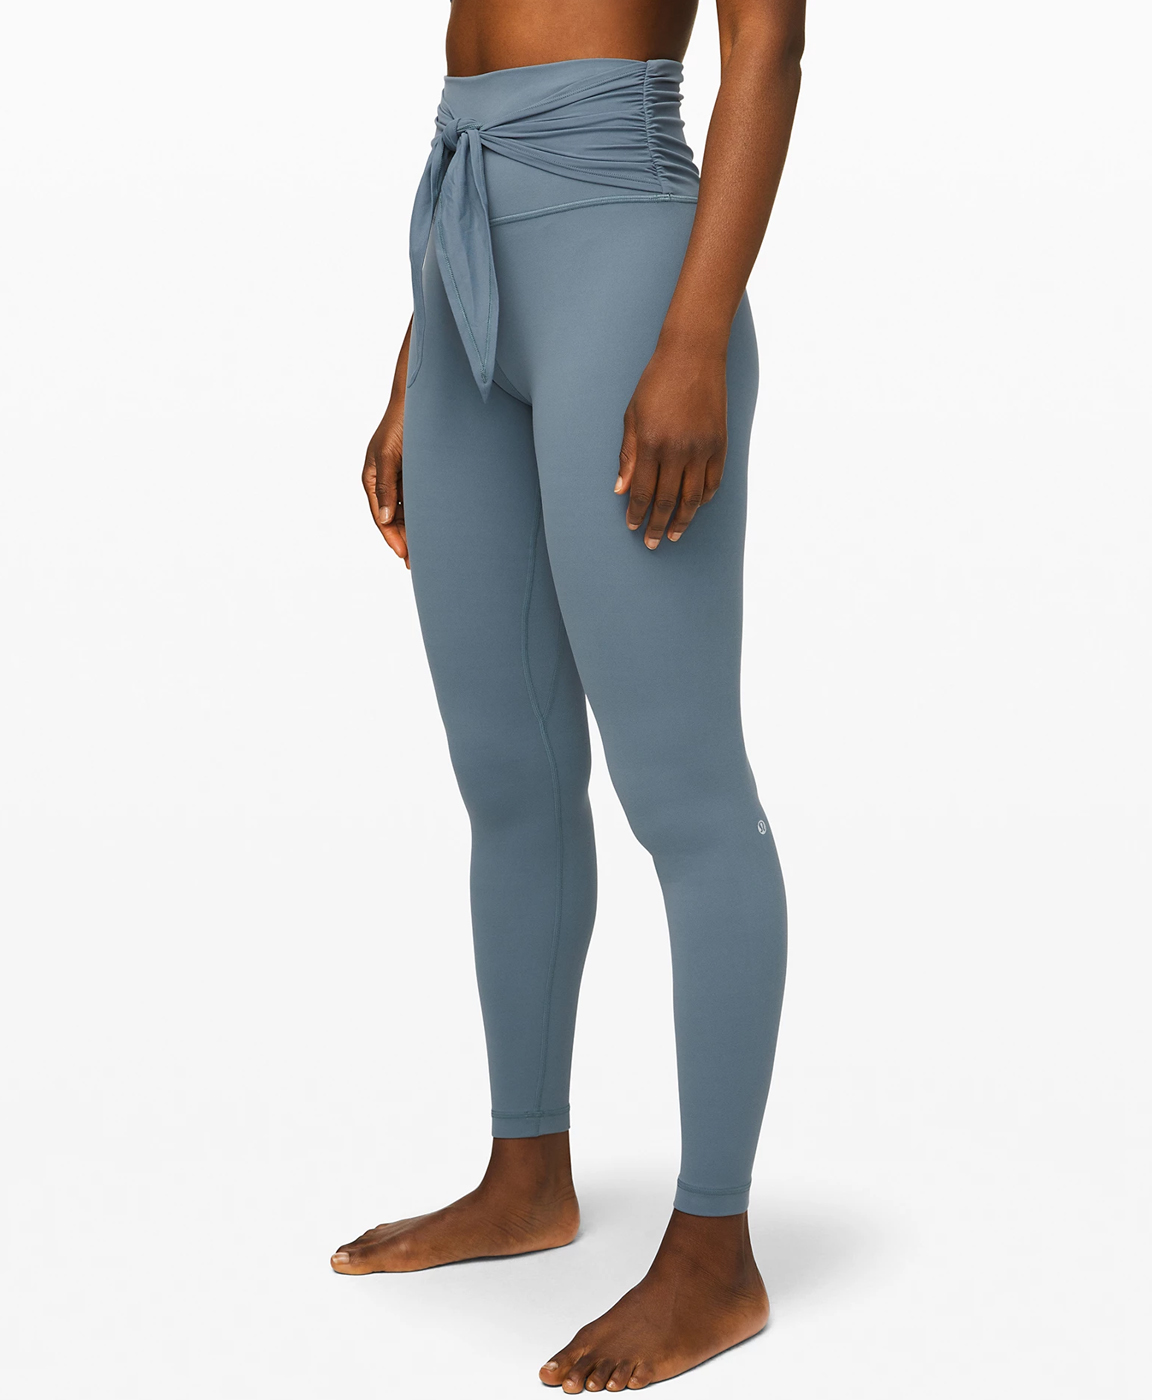 Lululemon Pants Styles  International Society of Precision Agriculture